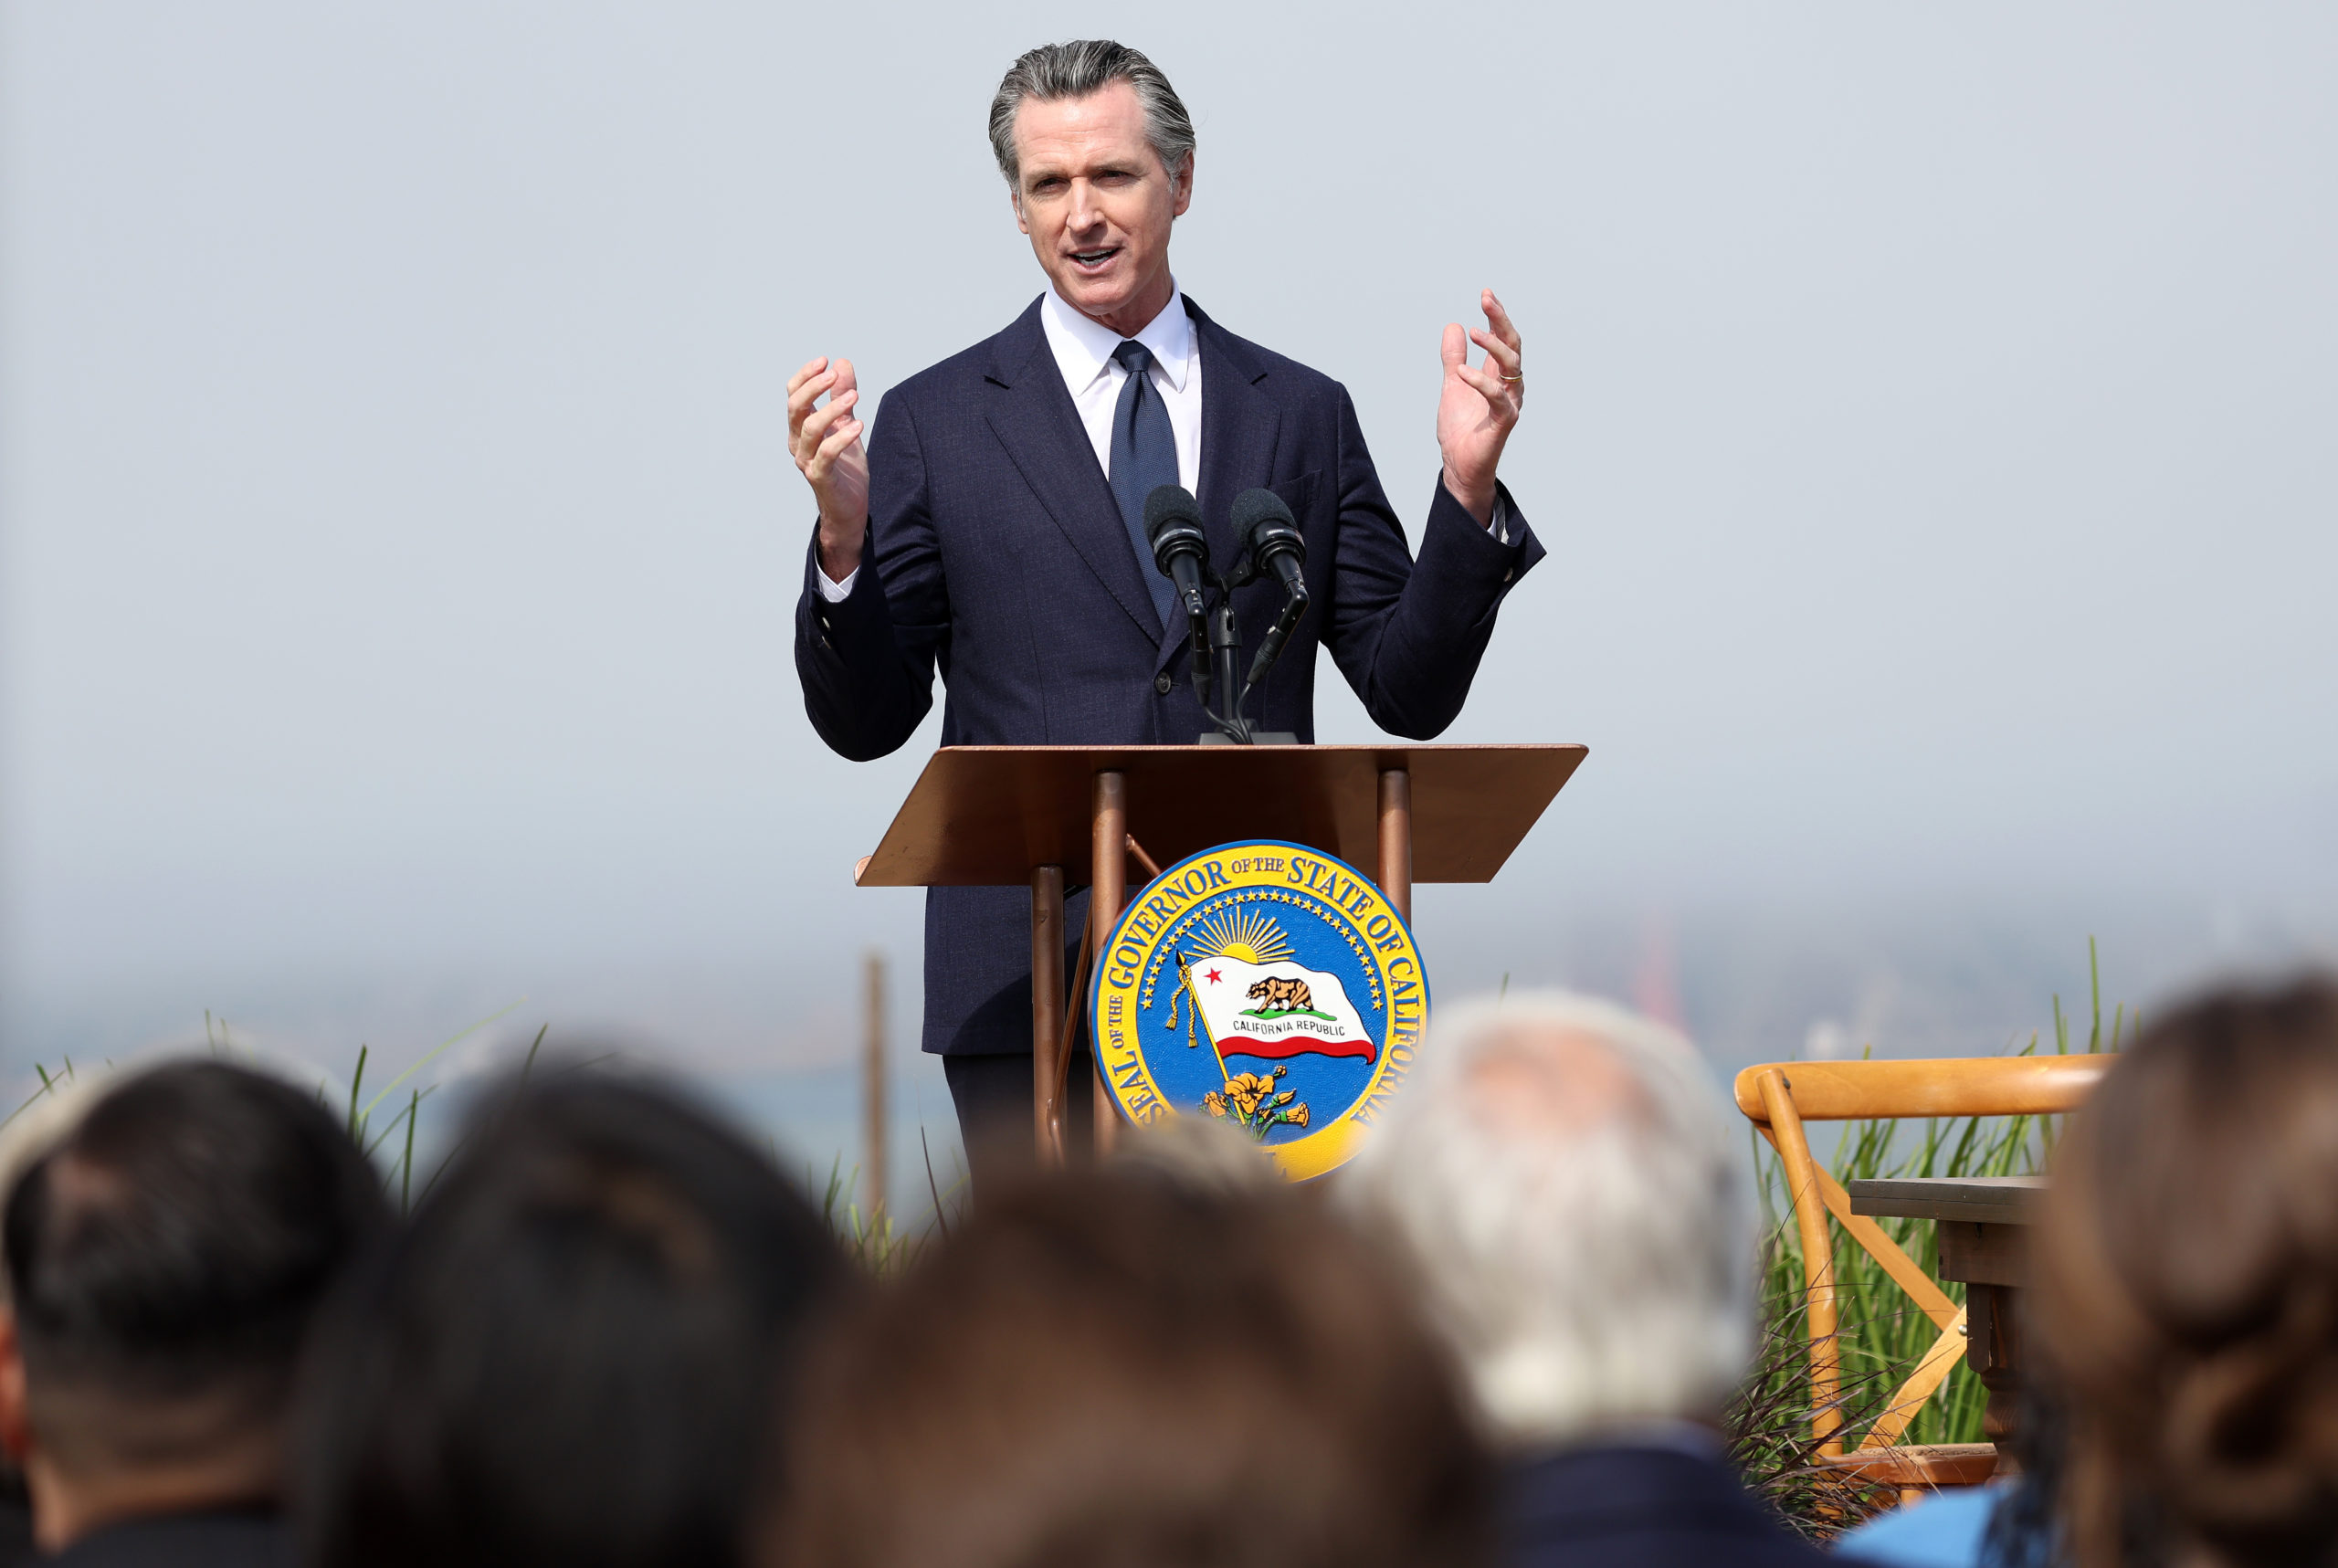 SAN FRANCISCO, CALIFORNIA - OCTOBER 06: (L-R) California Gov. Gavin Newsom speaks during a press conference on October 06, 2022 in San Francisco, California. California Gov. Gavin Newsom was joined by the governors of Washington, Oregon and the premier of British Columbia to sign a new climate agreement to further expand the region’s climate partnership. (Photo by Justin Sullivan/Getty Images)